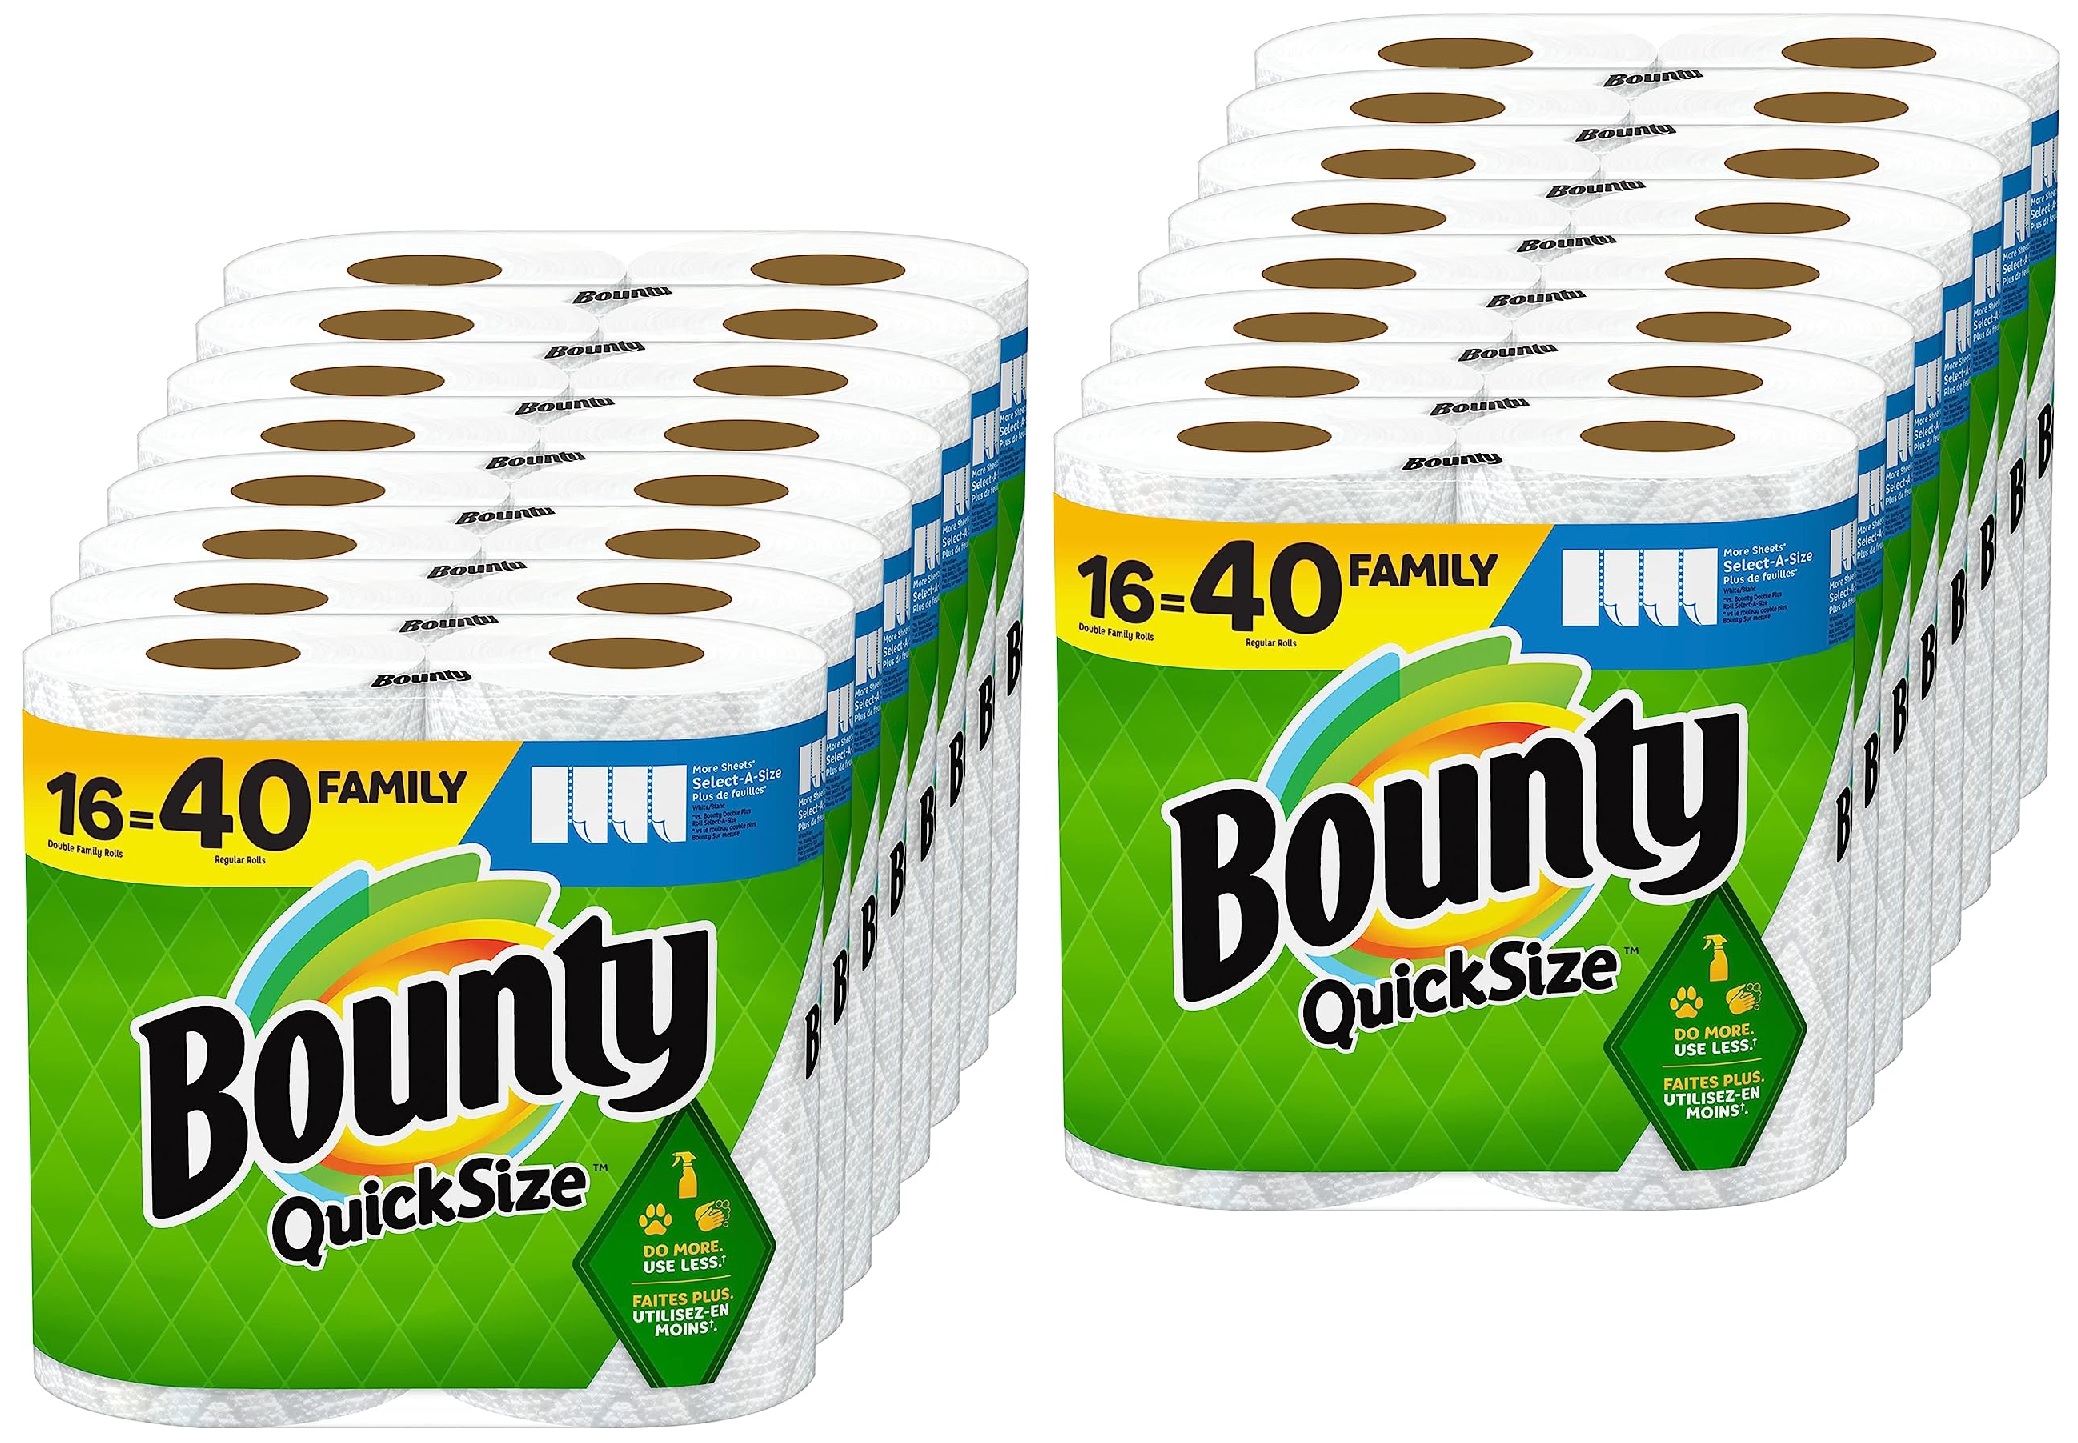 16-Ct Bounty Quick-Size Paper Towels (Family Rolls) + $20 Amazon Credit  2 for $79.65 & More w/ S&S + Free Shipping